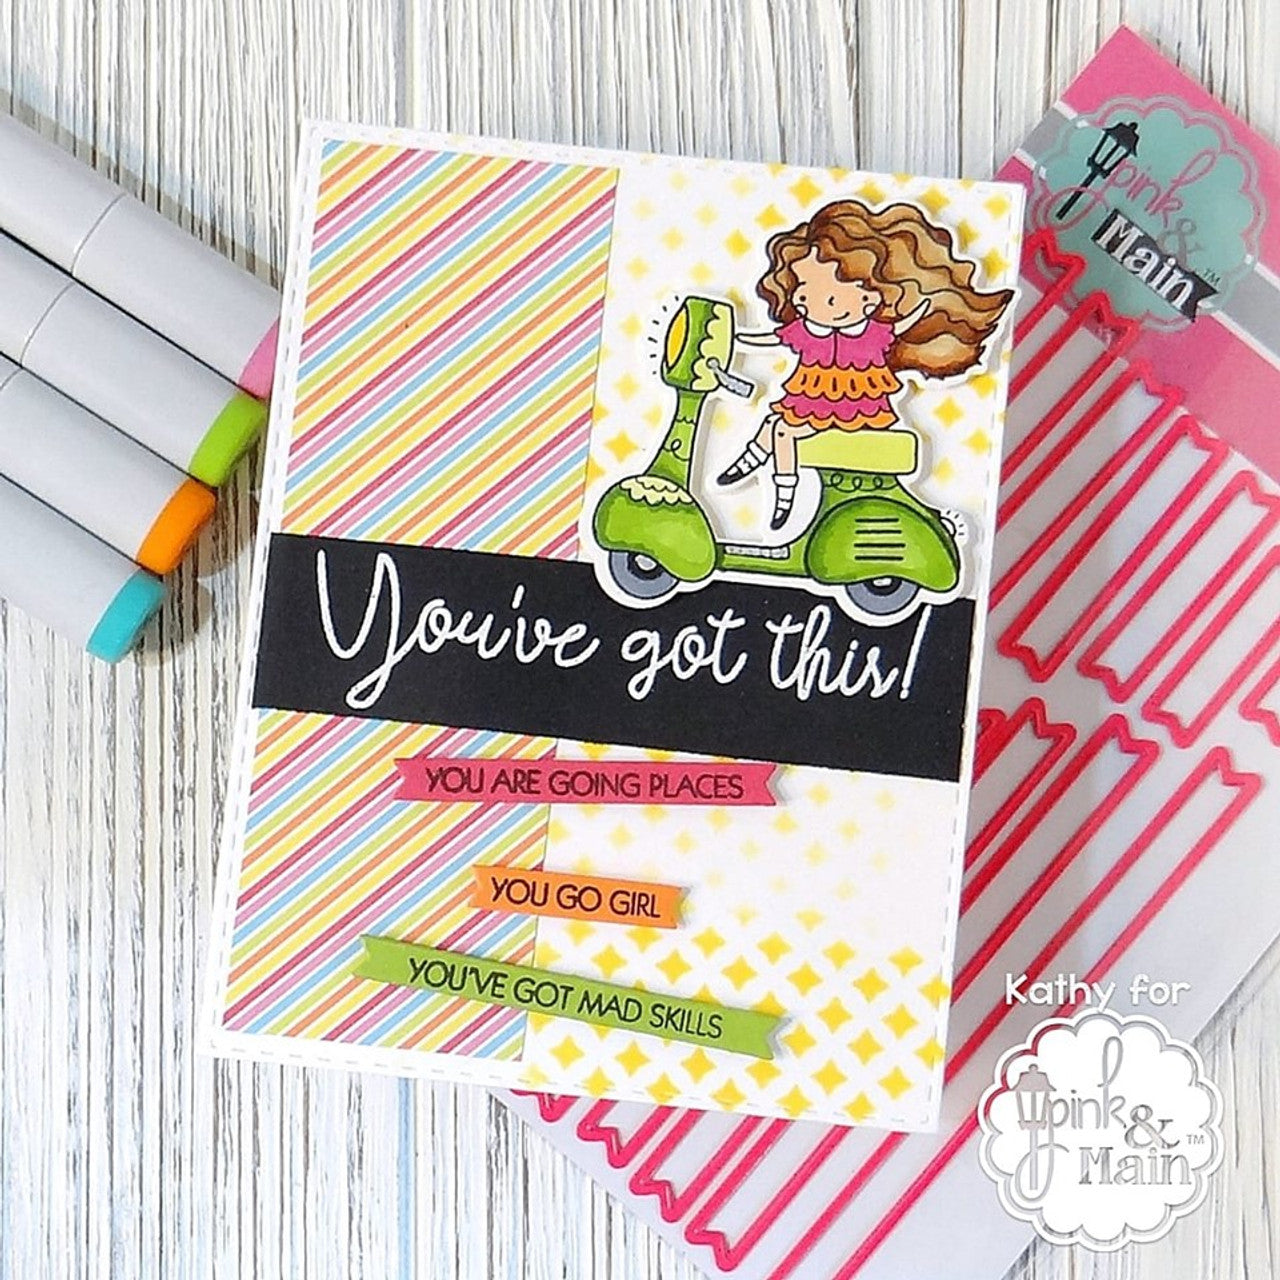 Pink & Main Going Places Stamp Set